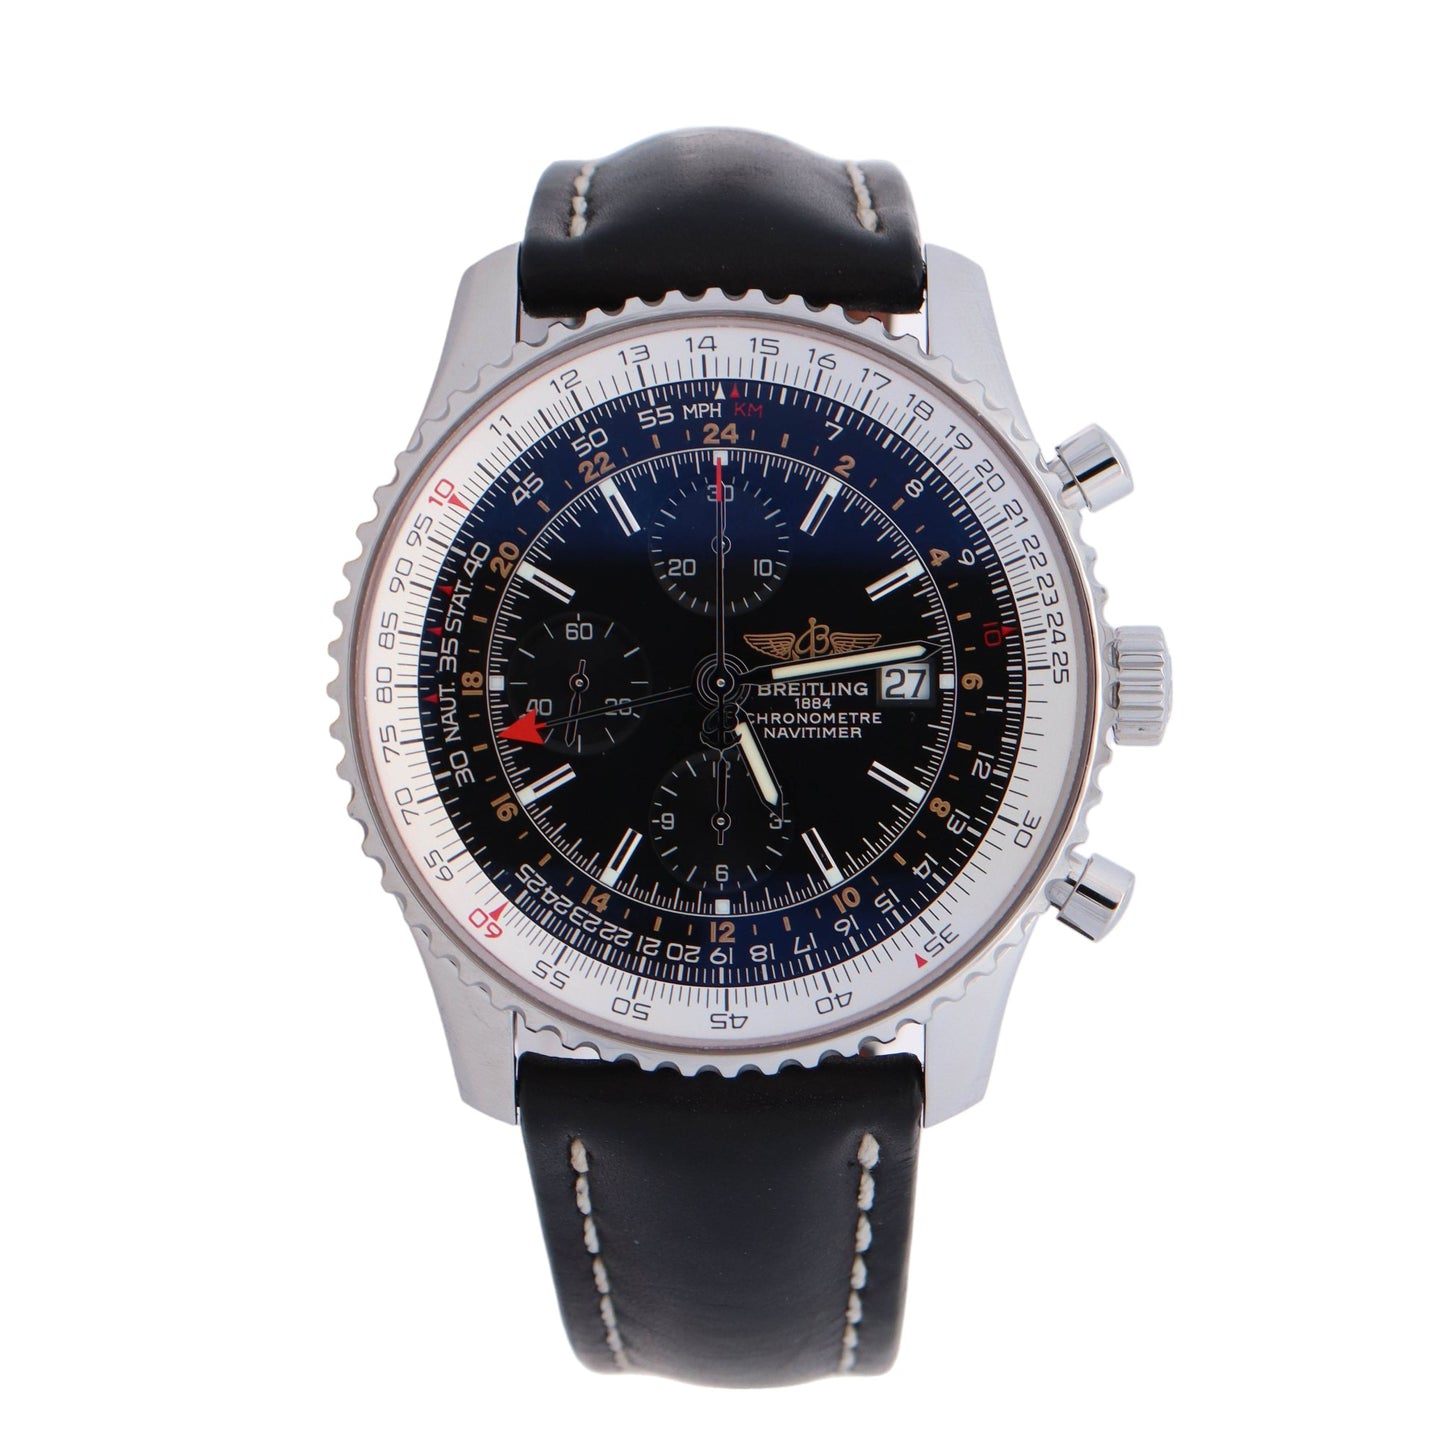 Breitling Navitimer World Stainless Steel 46mm Black Chronograph Dial Watch Reference #: A24322 - Happy Jewelers Fine Jewelry Lifetime Warranty